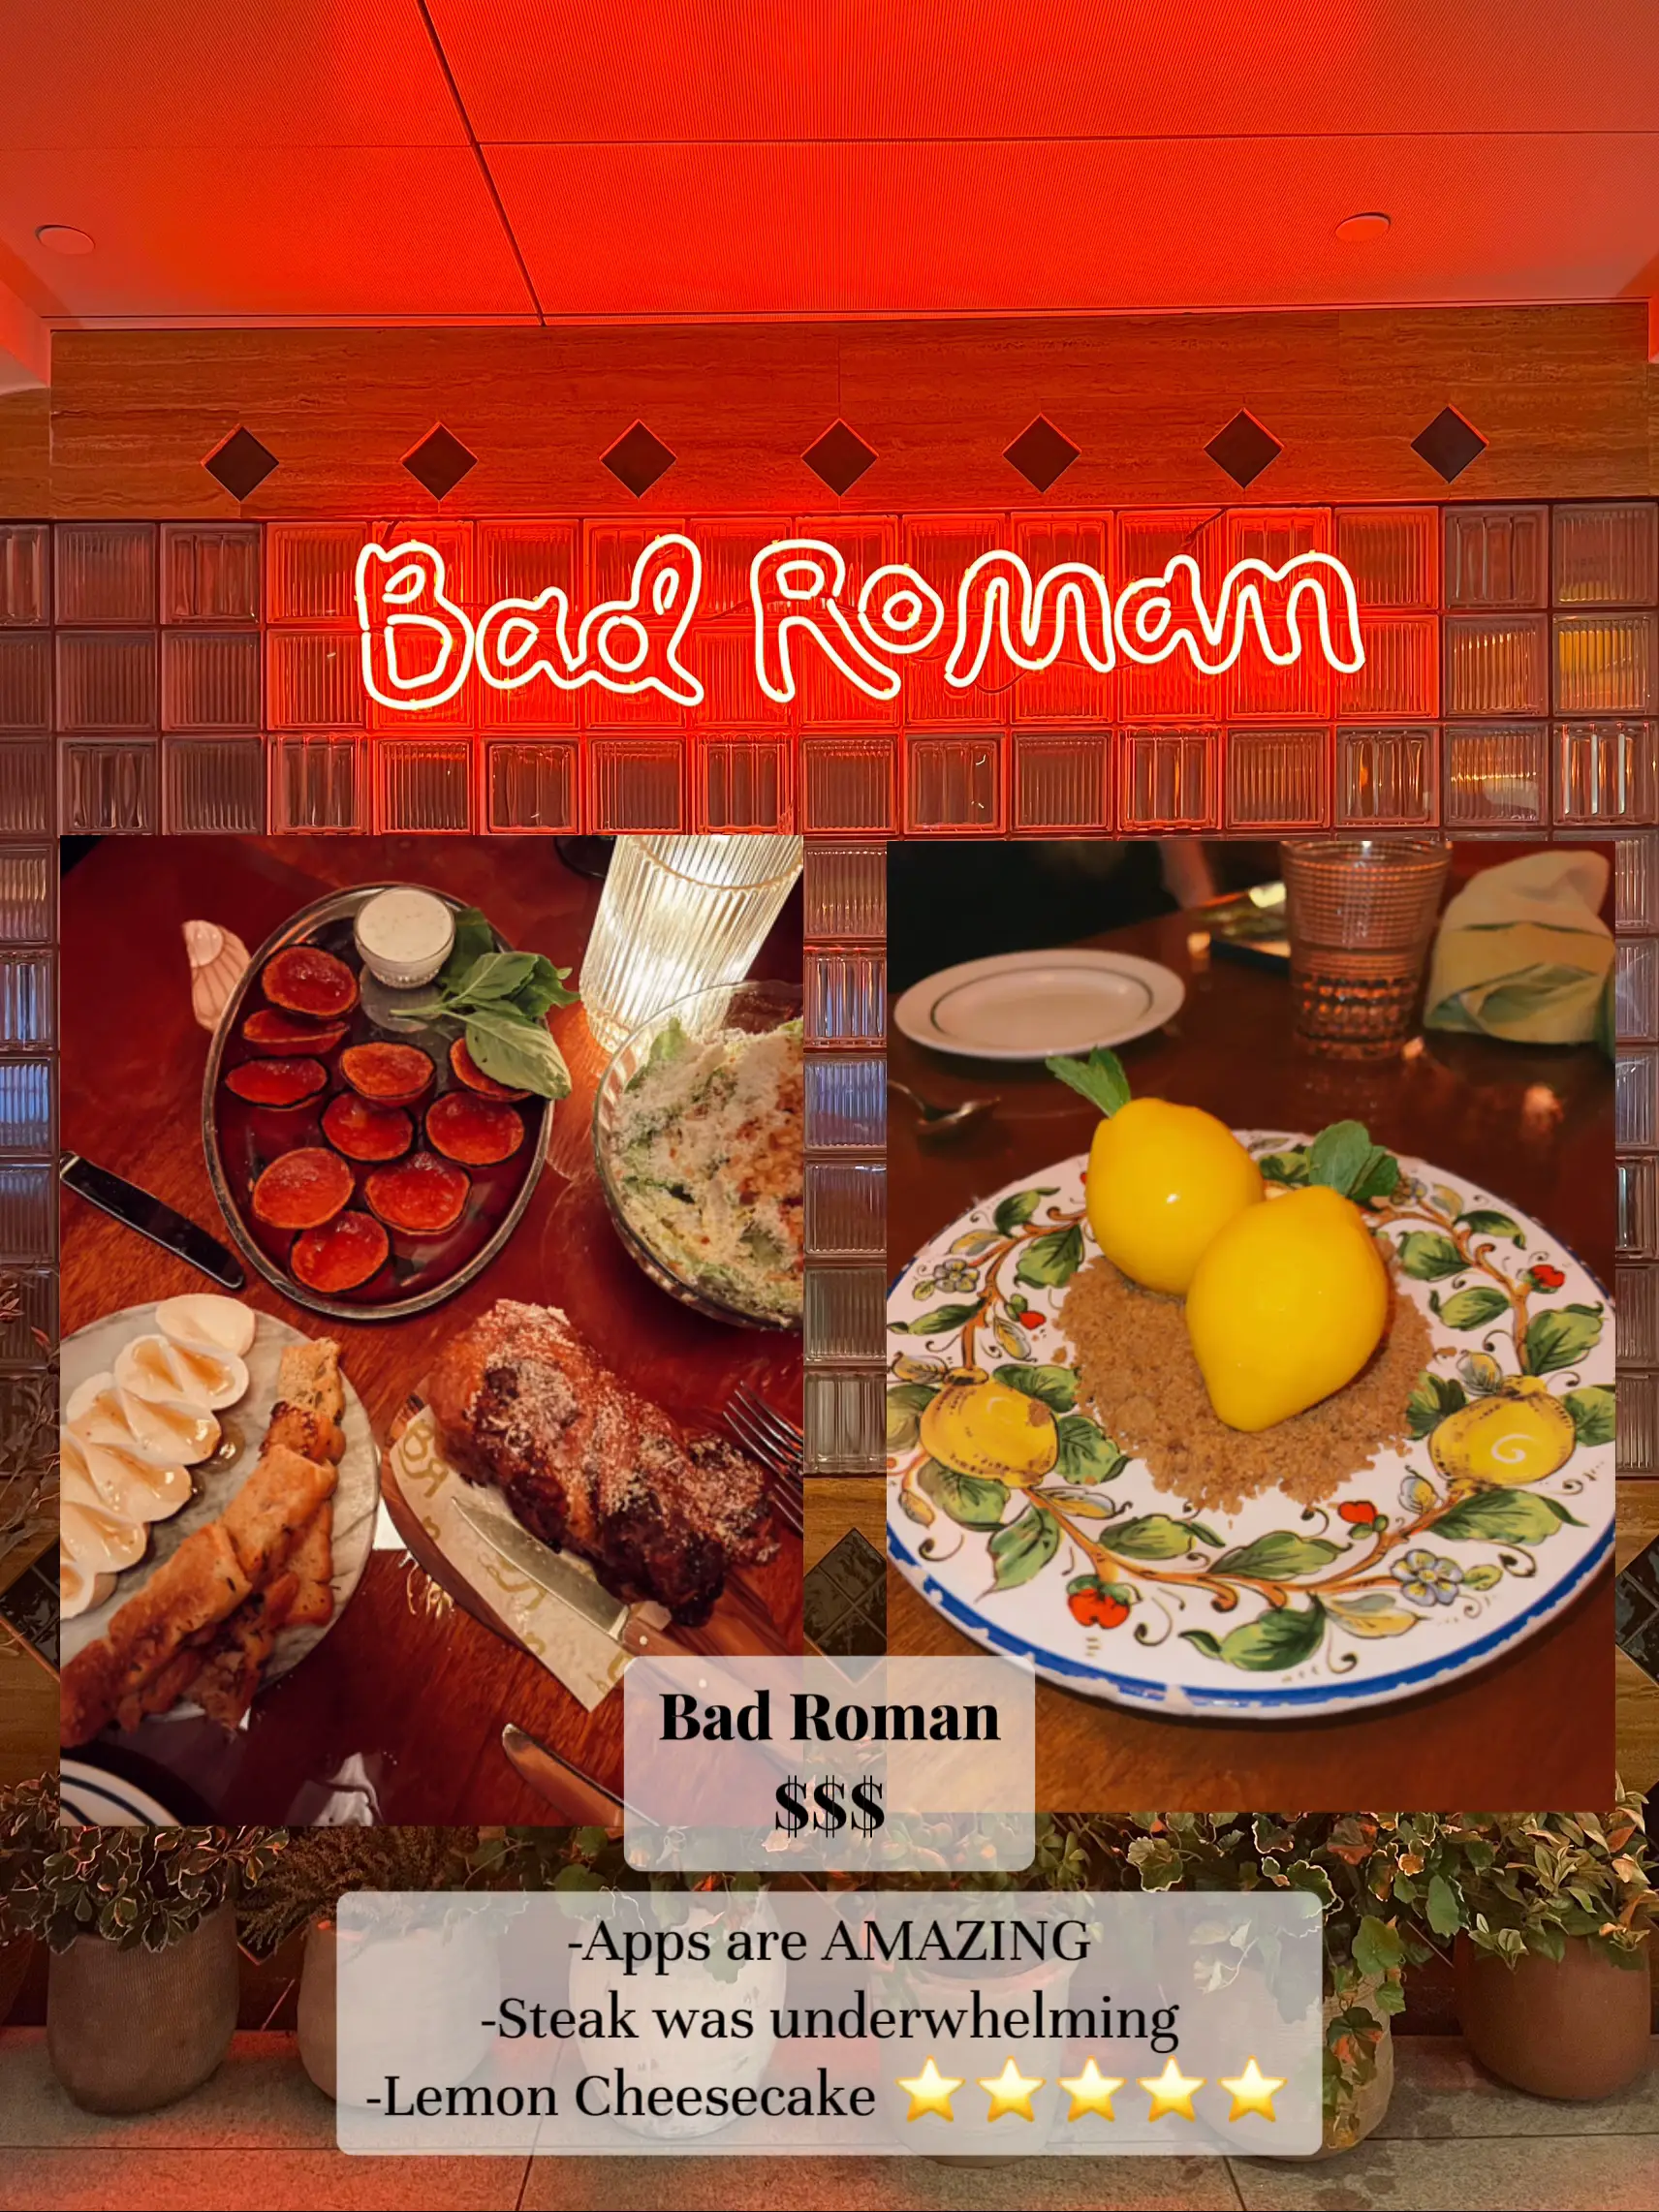  A collage of pictures of food with the words "Bad Roman" in the top left.